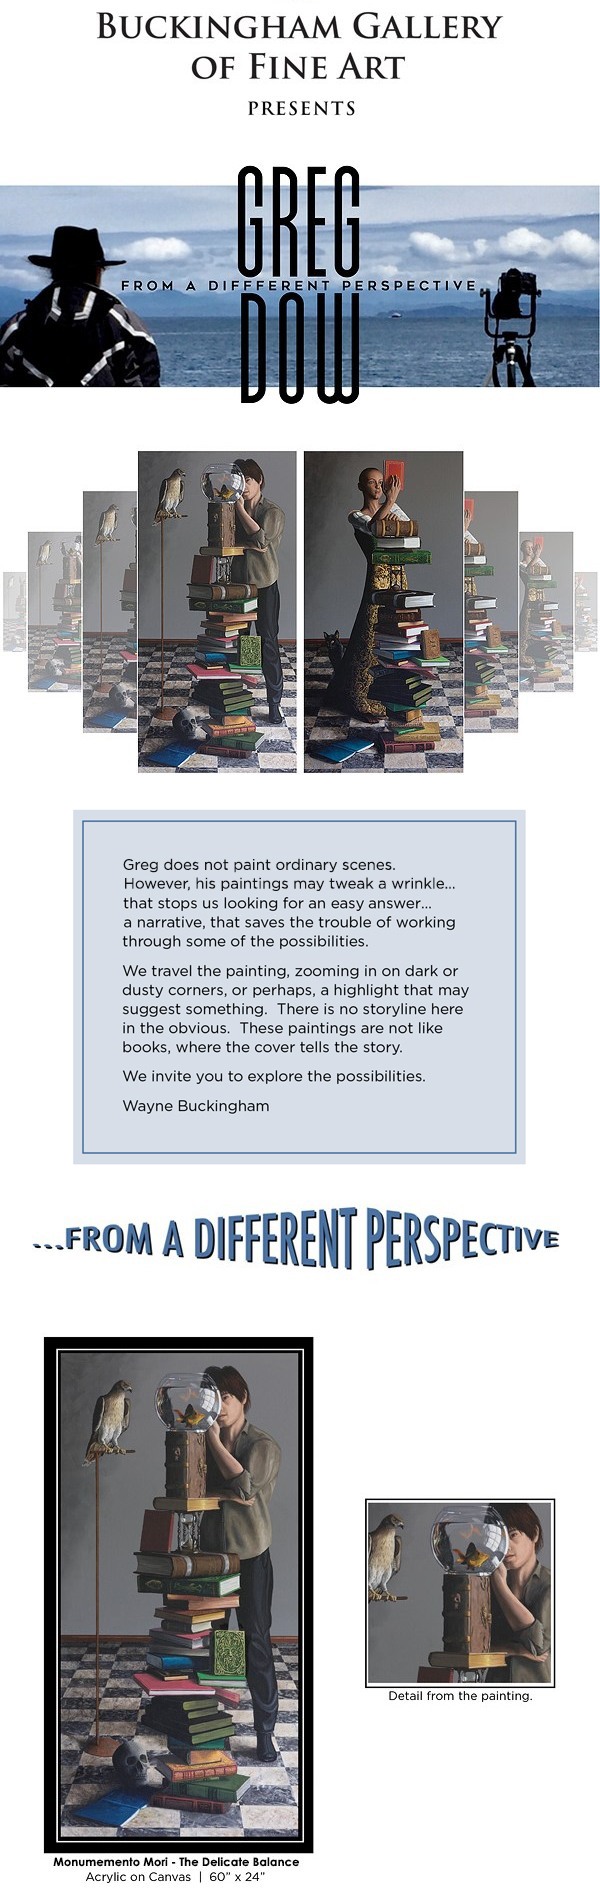 Greg Dow - From a Different Perspective